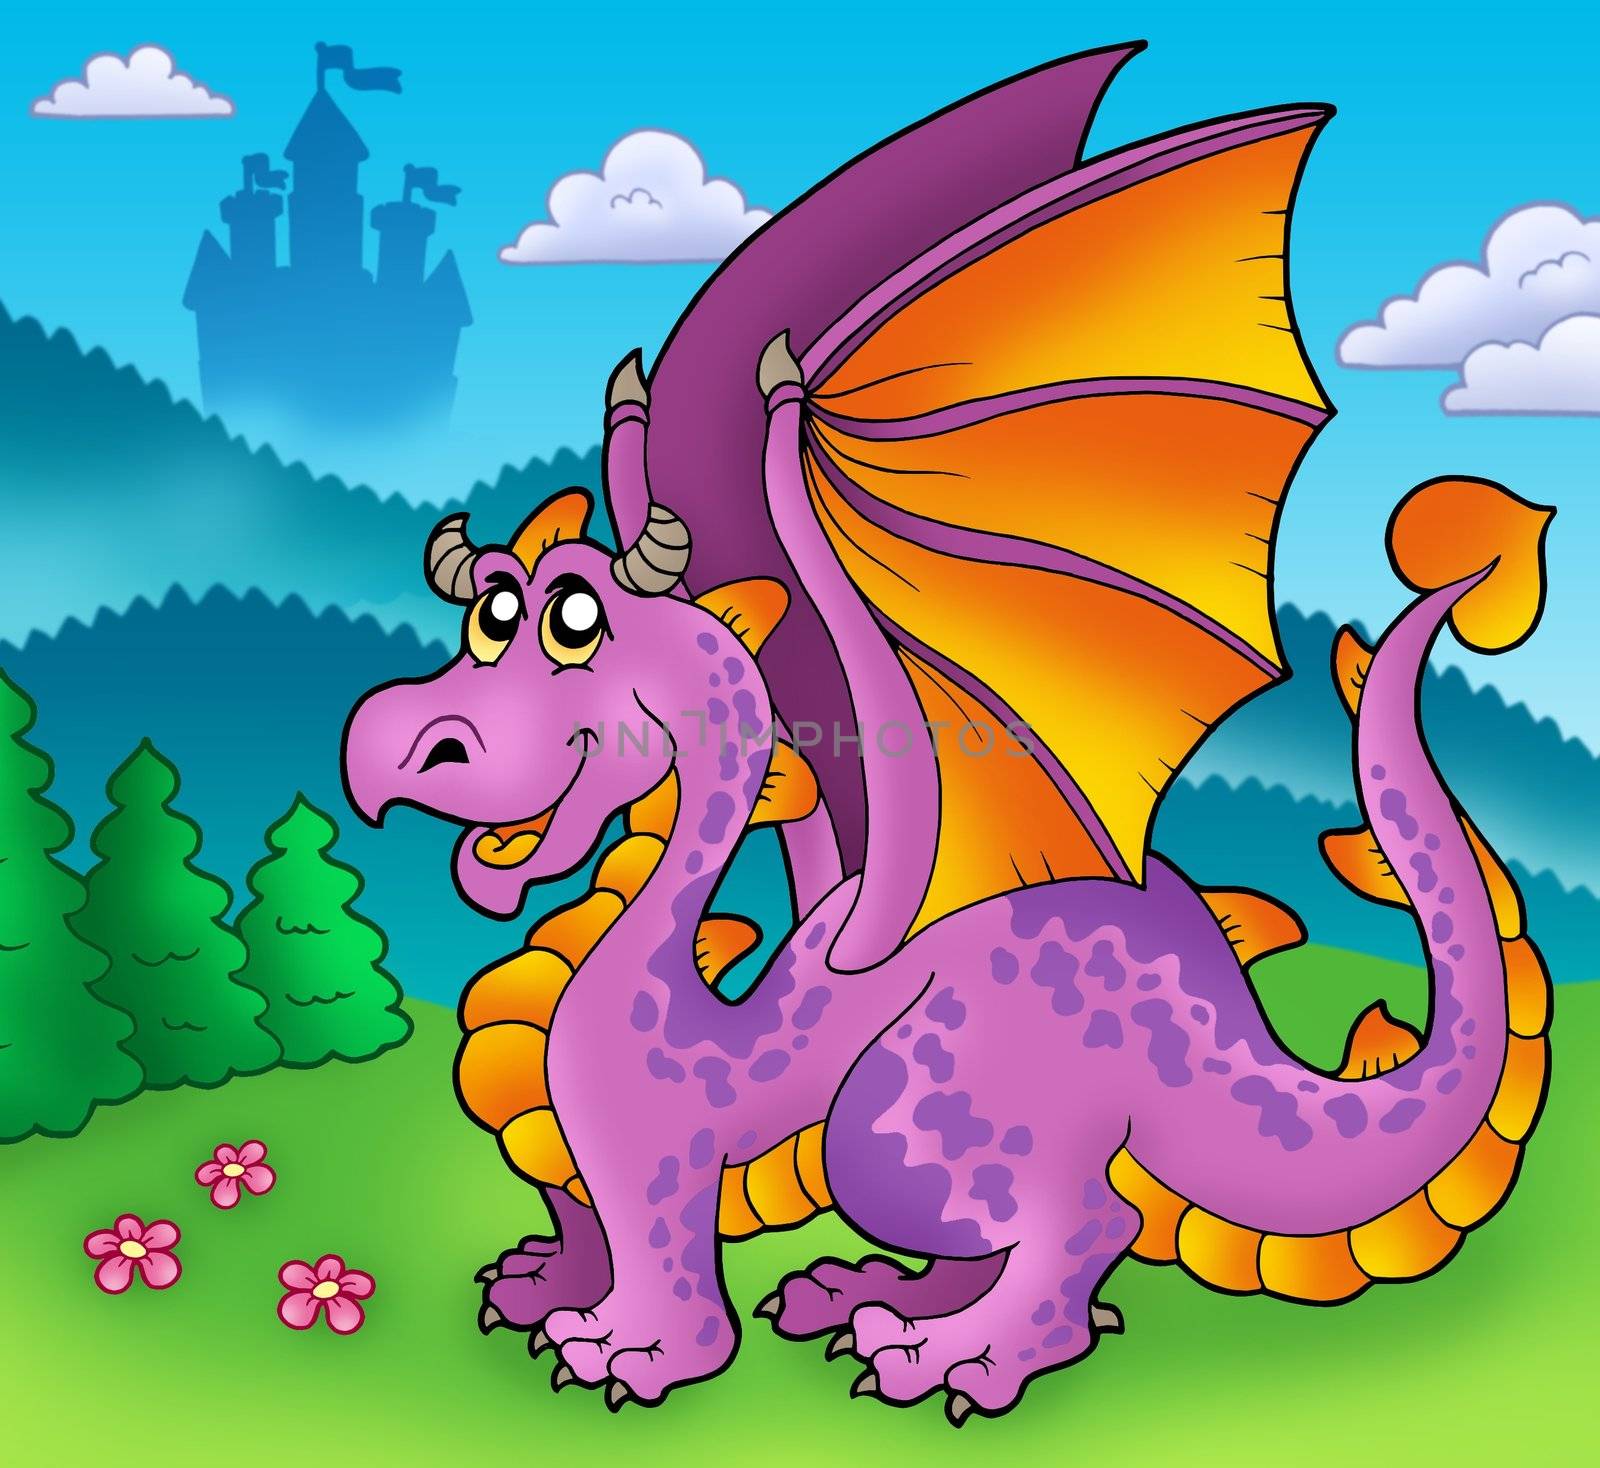 Giant purple dragon with old castle - color illustration.